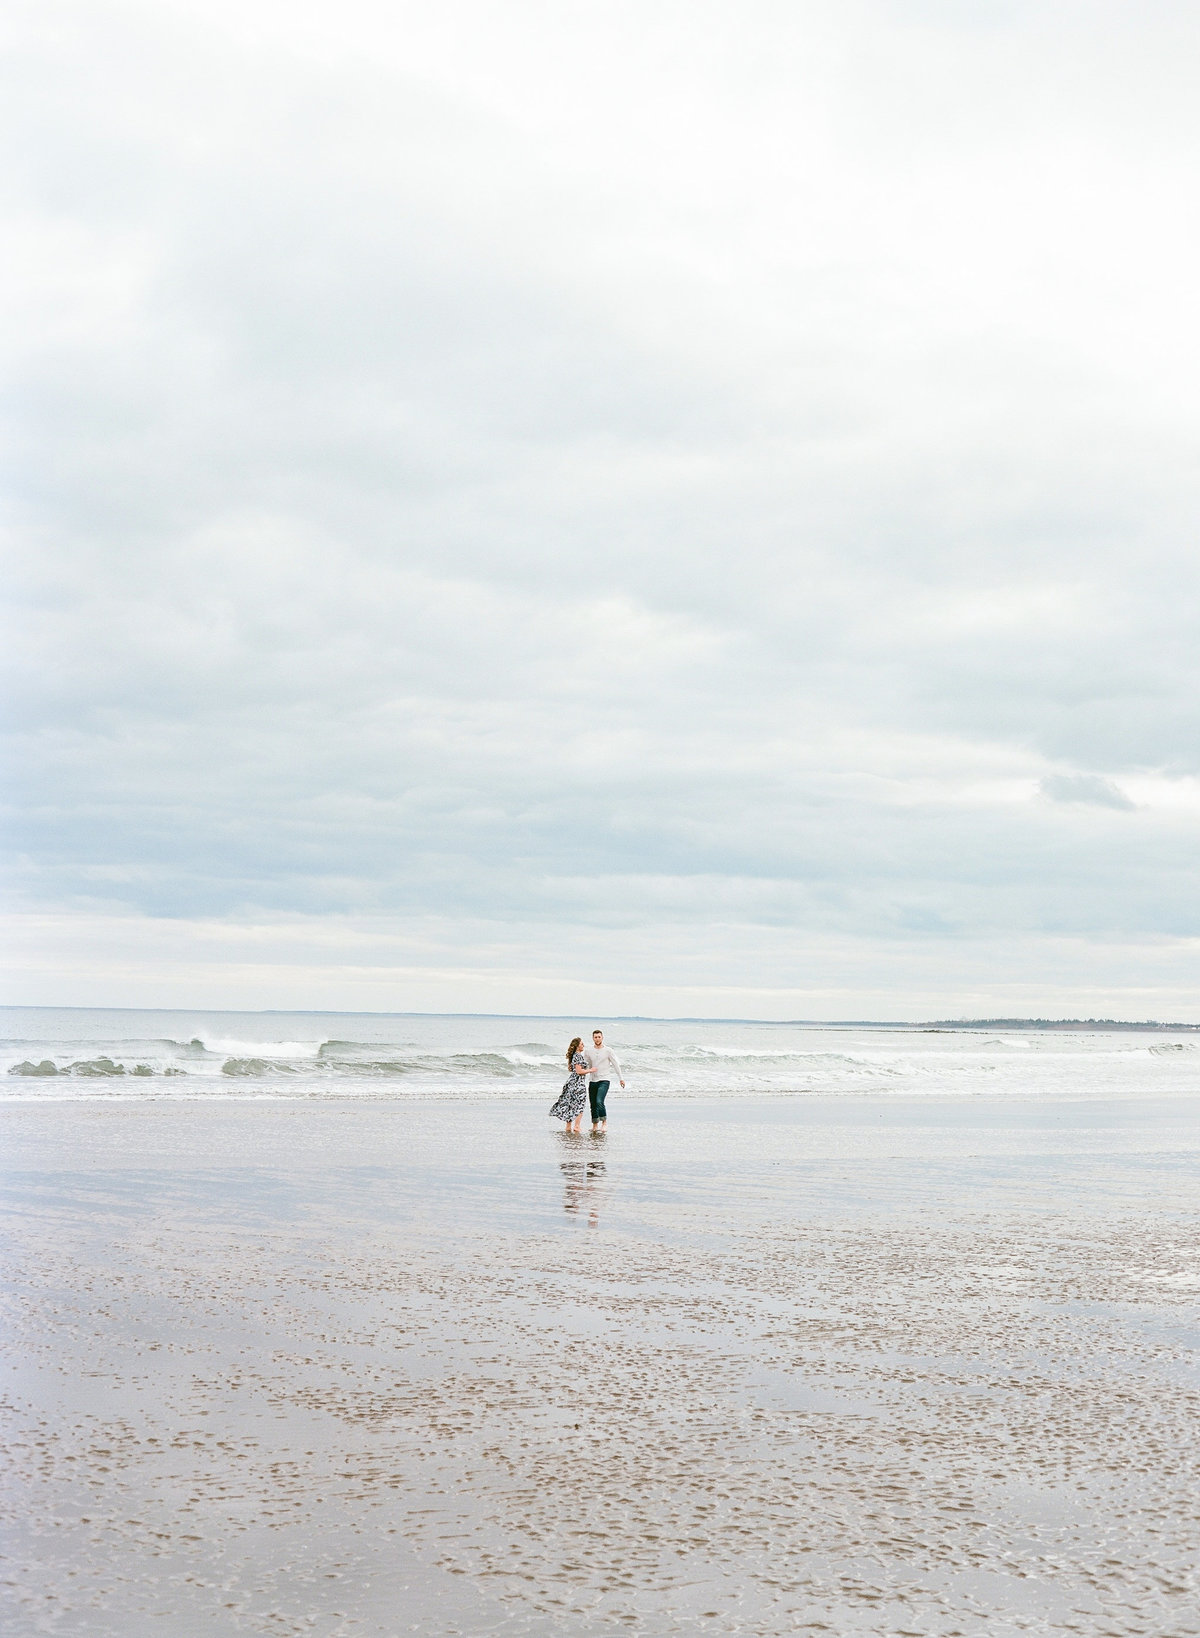 Jacqueline Anne Photography - Akayla and Andrew - Lawrencetown Beach-64